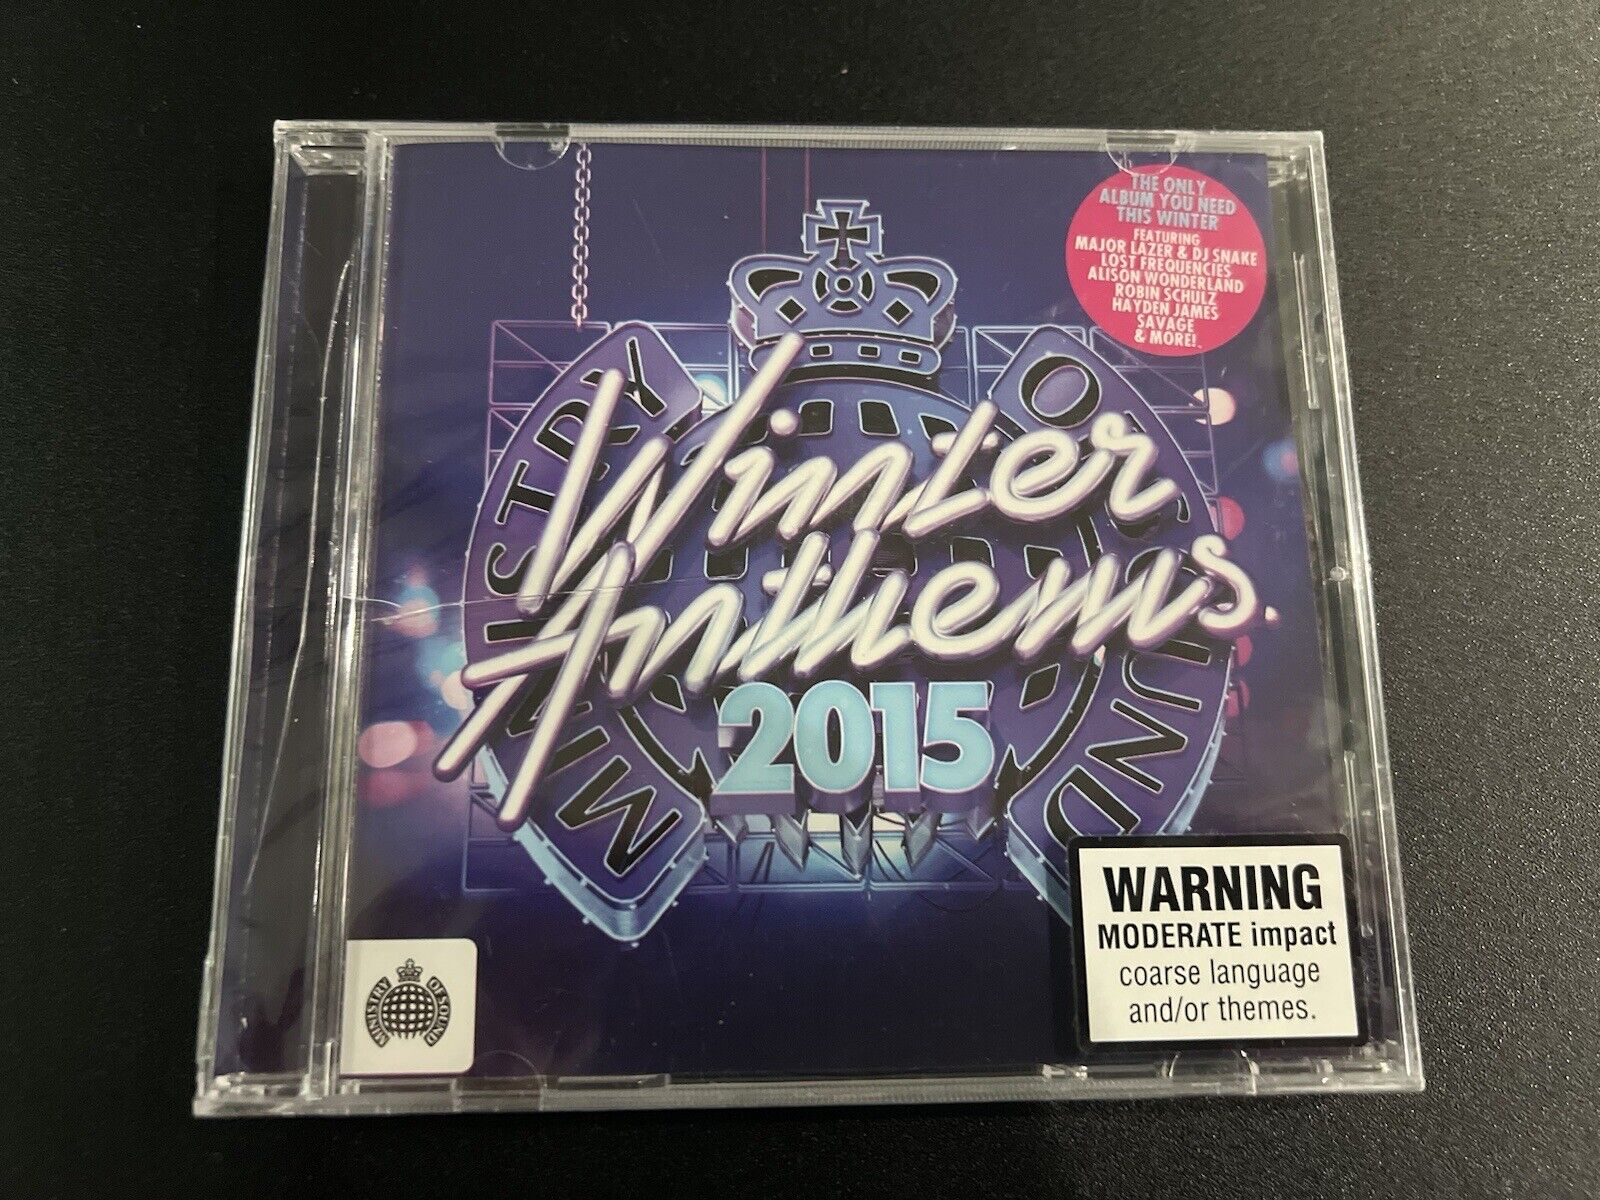 VARIOUS ARTISTS - MINISTRY OF SOUND: WINTER ANTHEMS 2015 NEW CD